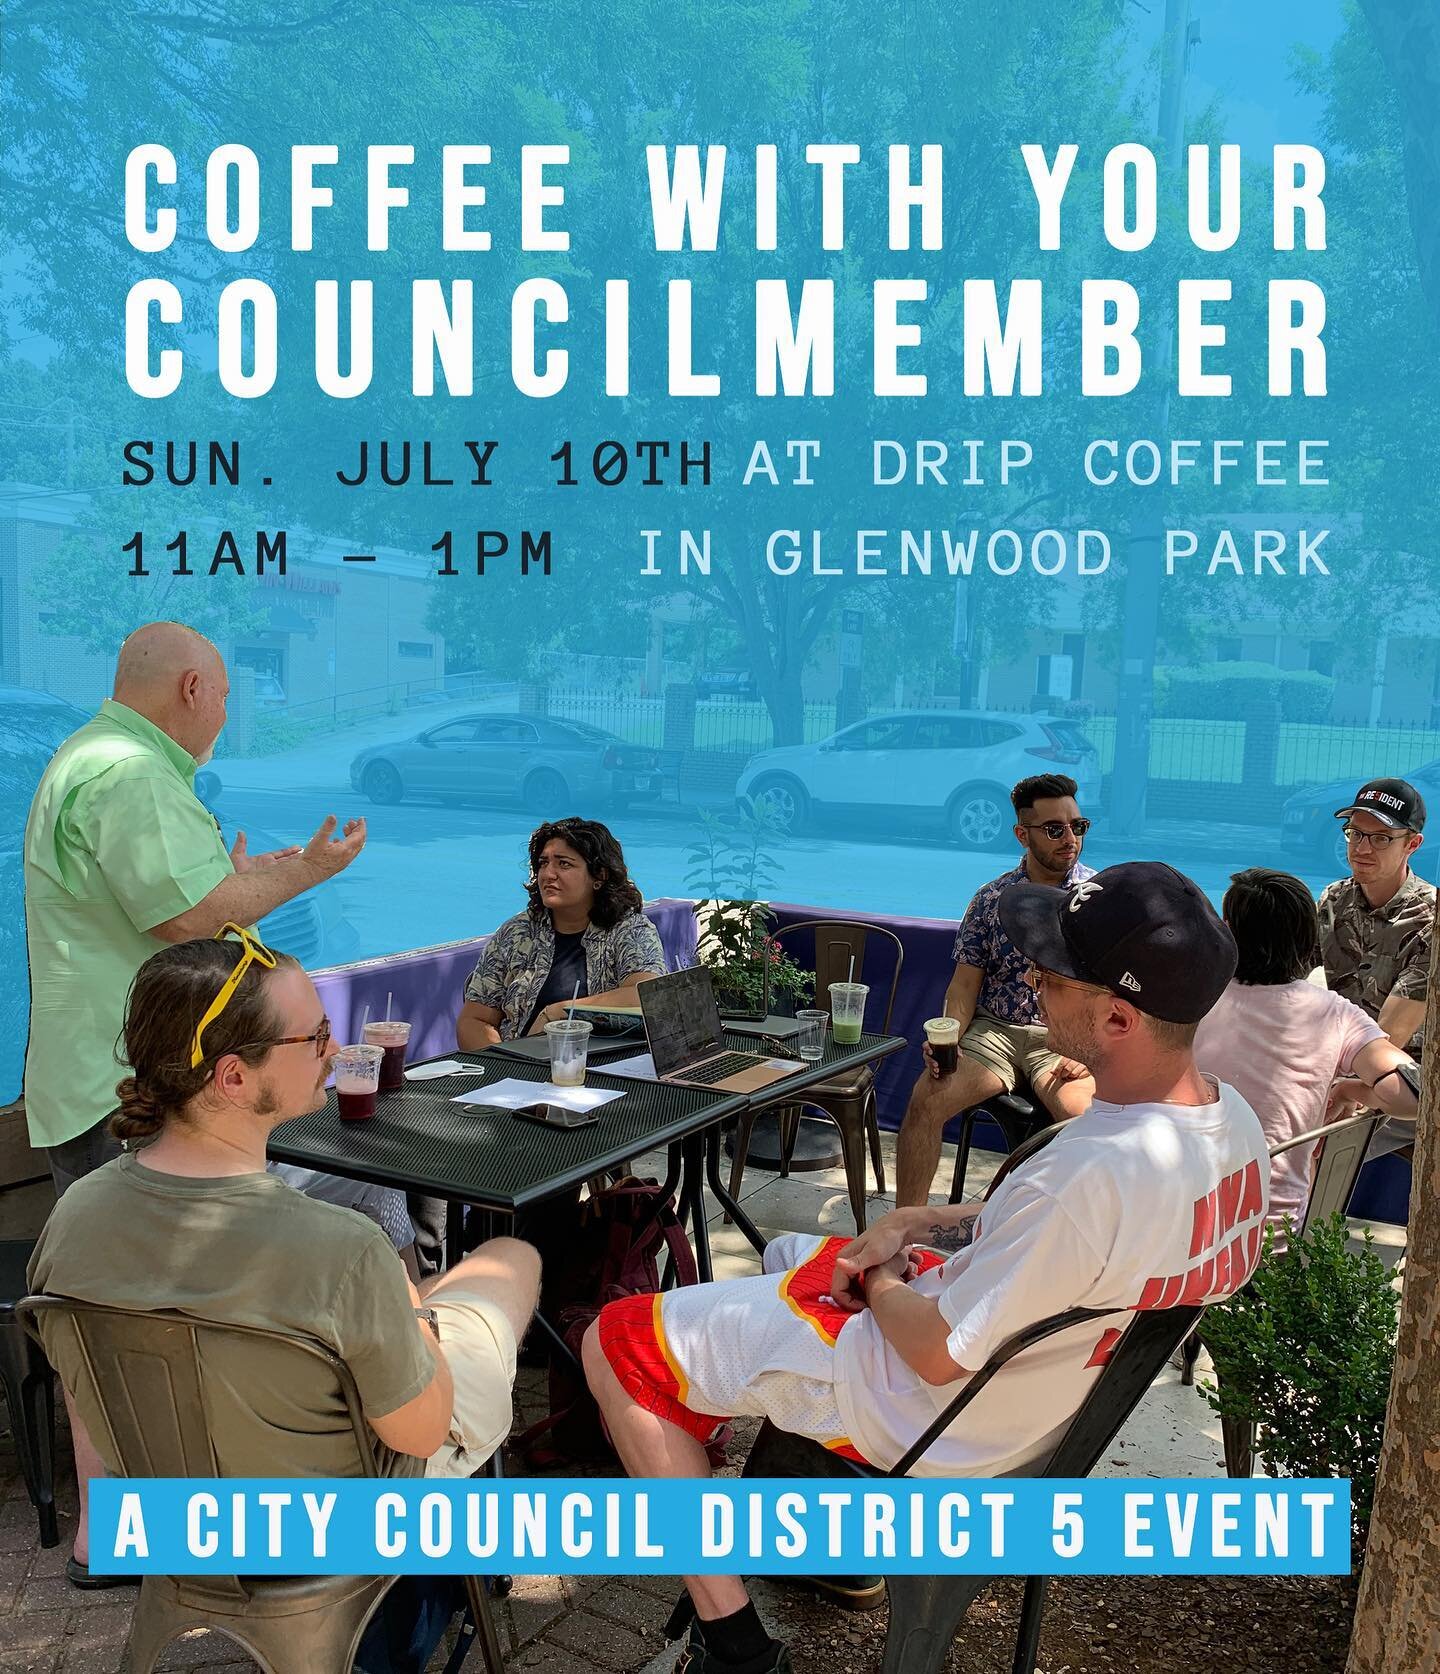 It&rsquo;s that time again! Join us for Coffee with Your Councilmember this Sunday at @dripatl in Glenwood Park! We&rsquo;ll be posted up from 11am - 1pm, ready to chat about District 5 issues, ideas, and upcoming projects. Hope to see you there!